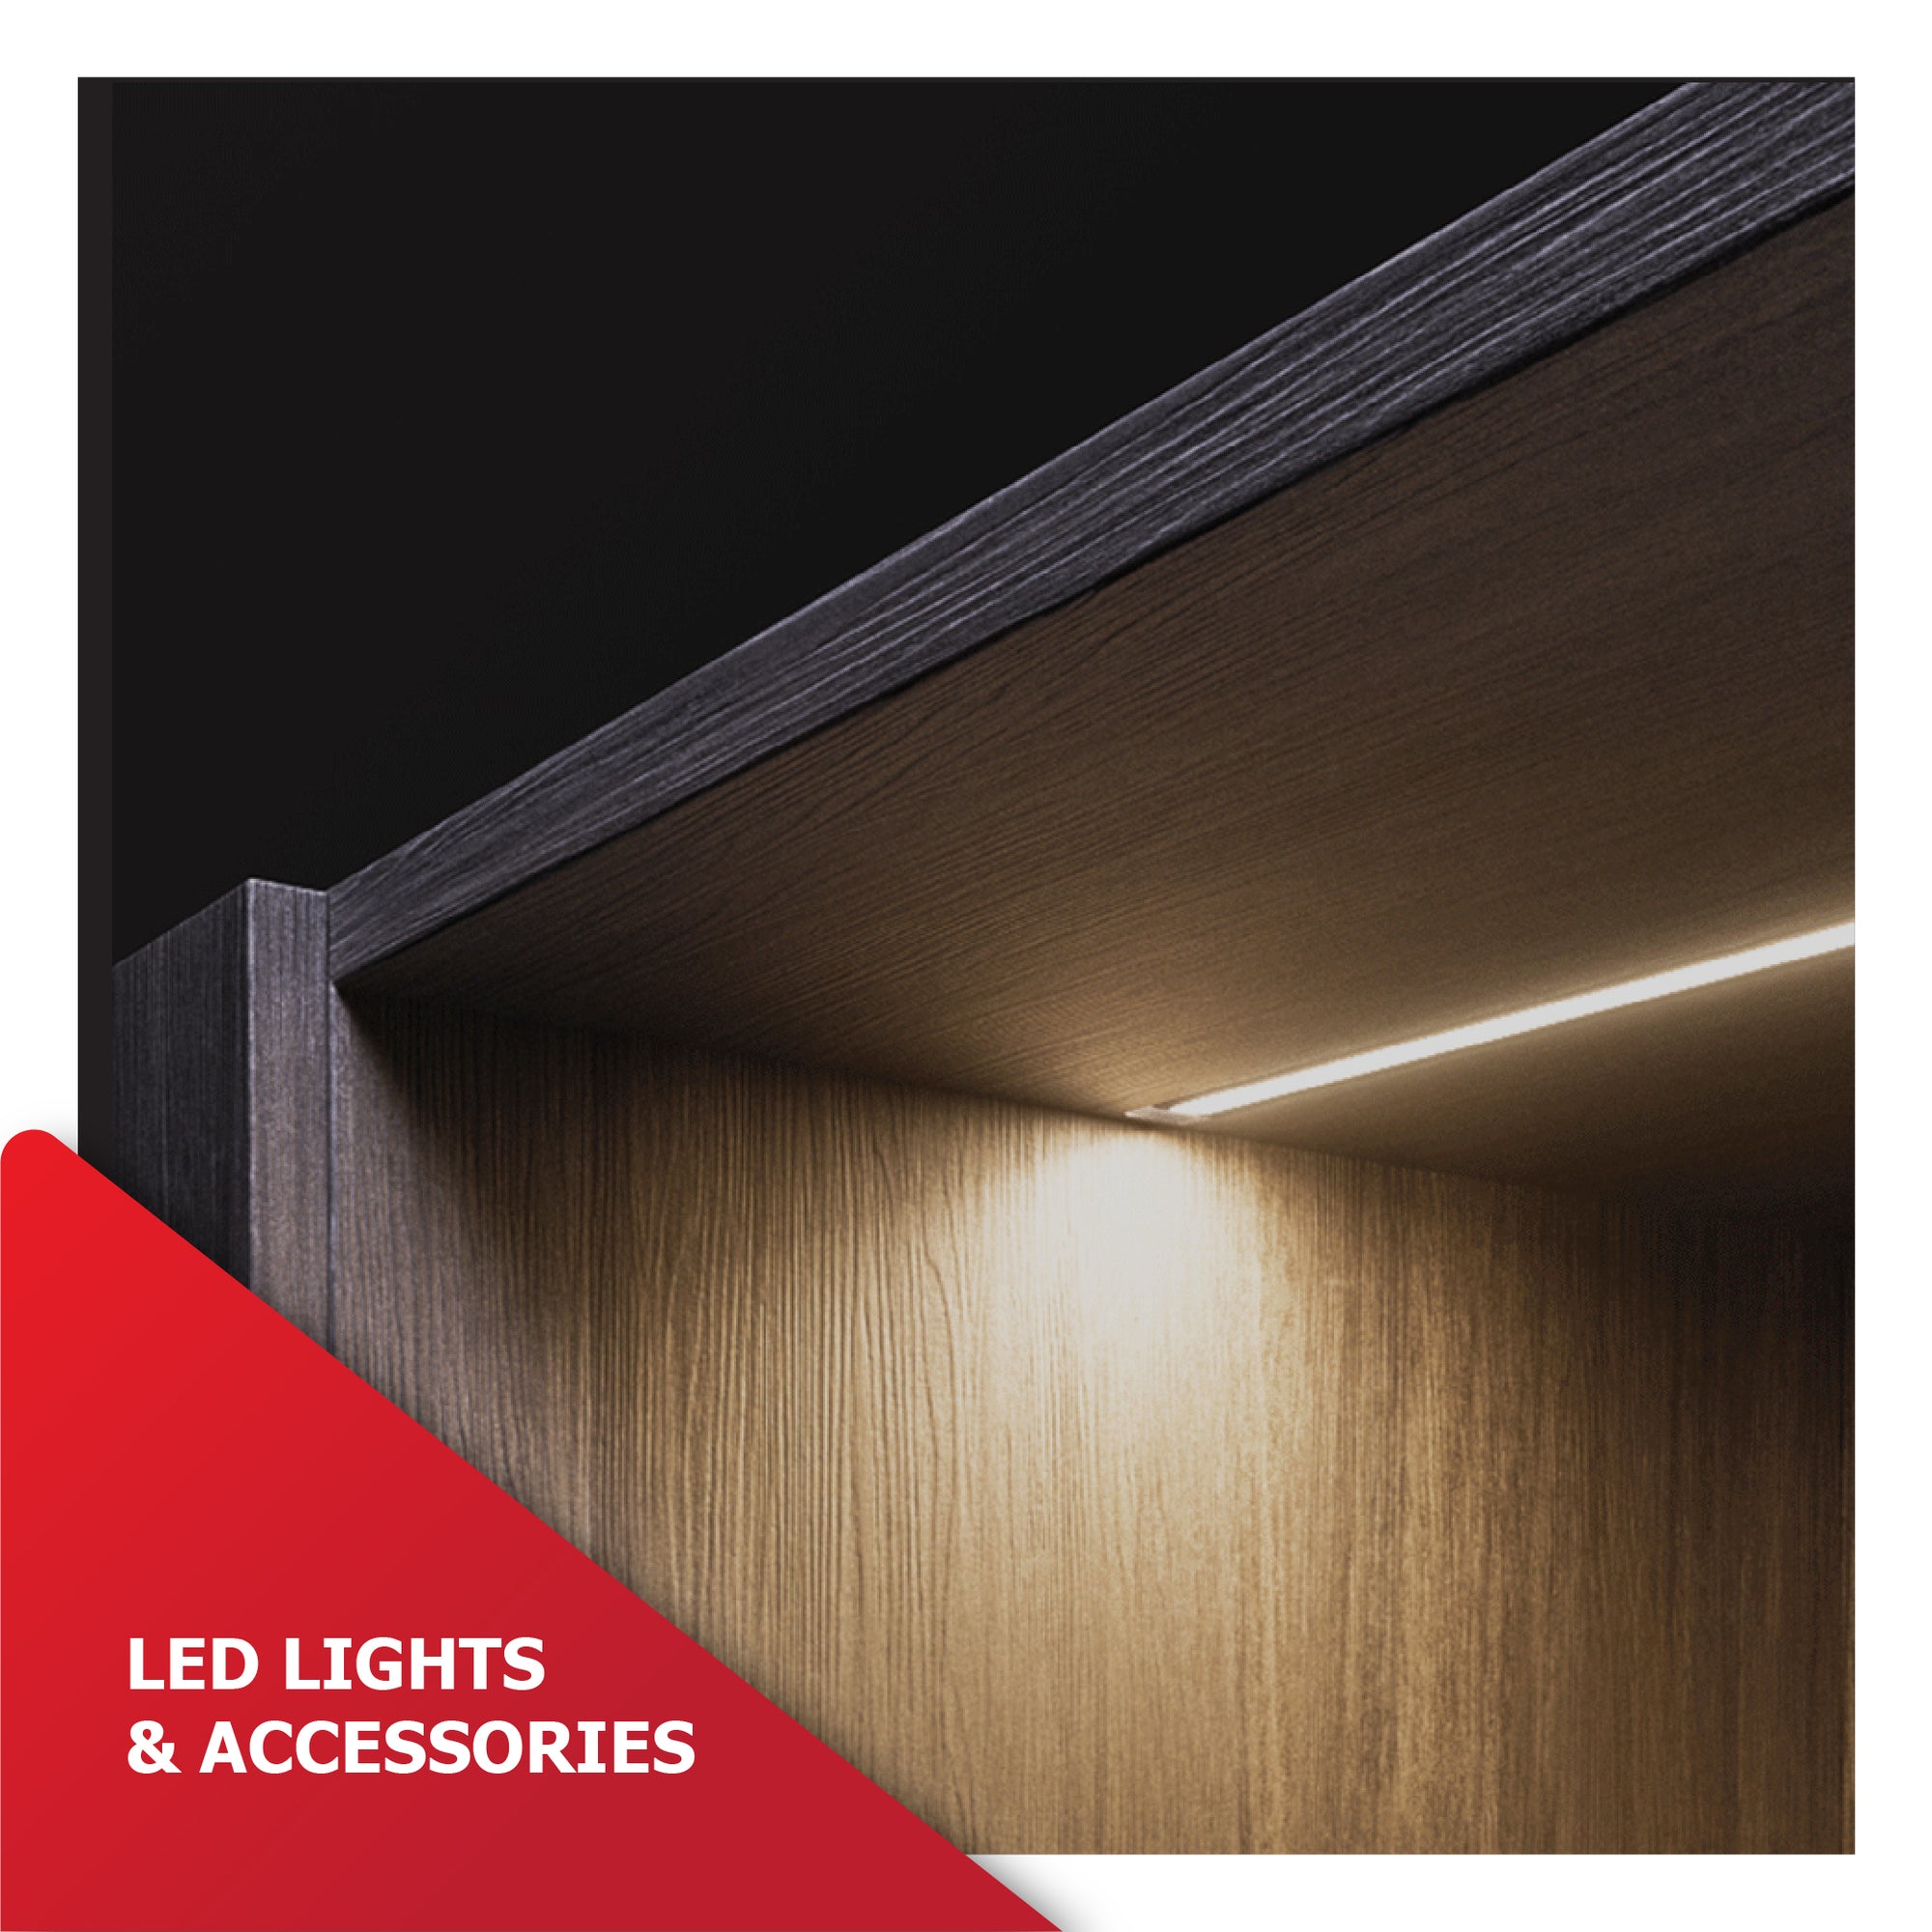 LED Lights & Accessories | Category